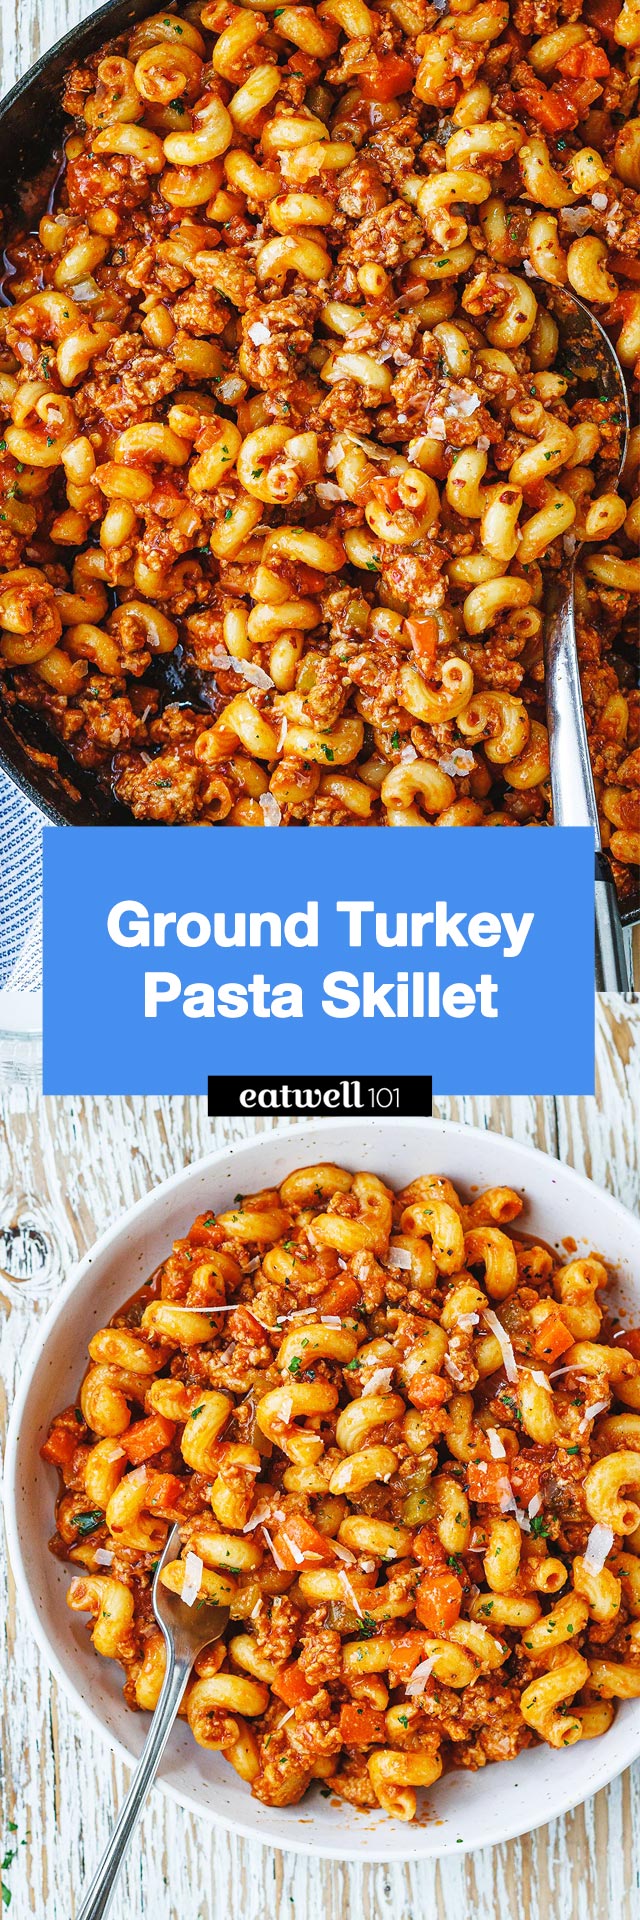 Ground Turkey Pasta Skillet - #turkey #pasta #recipe #eatwell101 - Try this quick and easy ground turkey pasta skillet is ready in less than 30 minutes - perfect for busy weeknights! Packed with hearty flavors, this turkey pasta dinner is sure to be a hit!